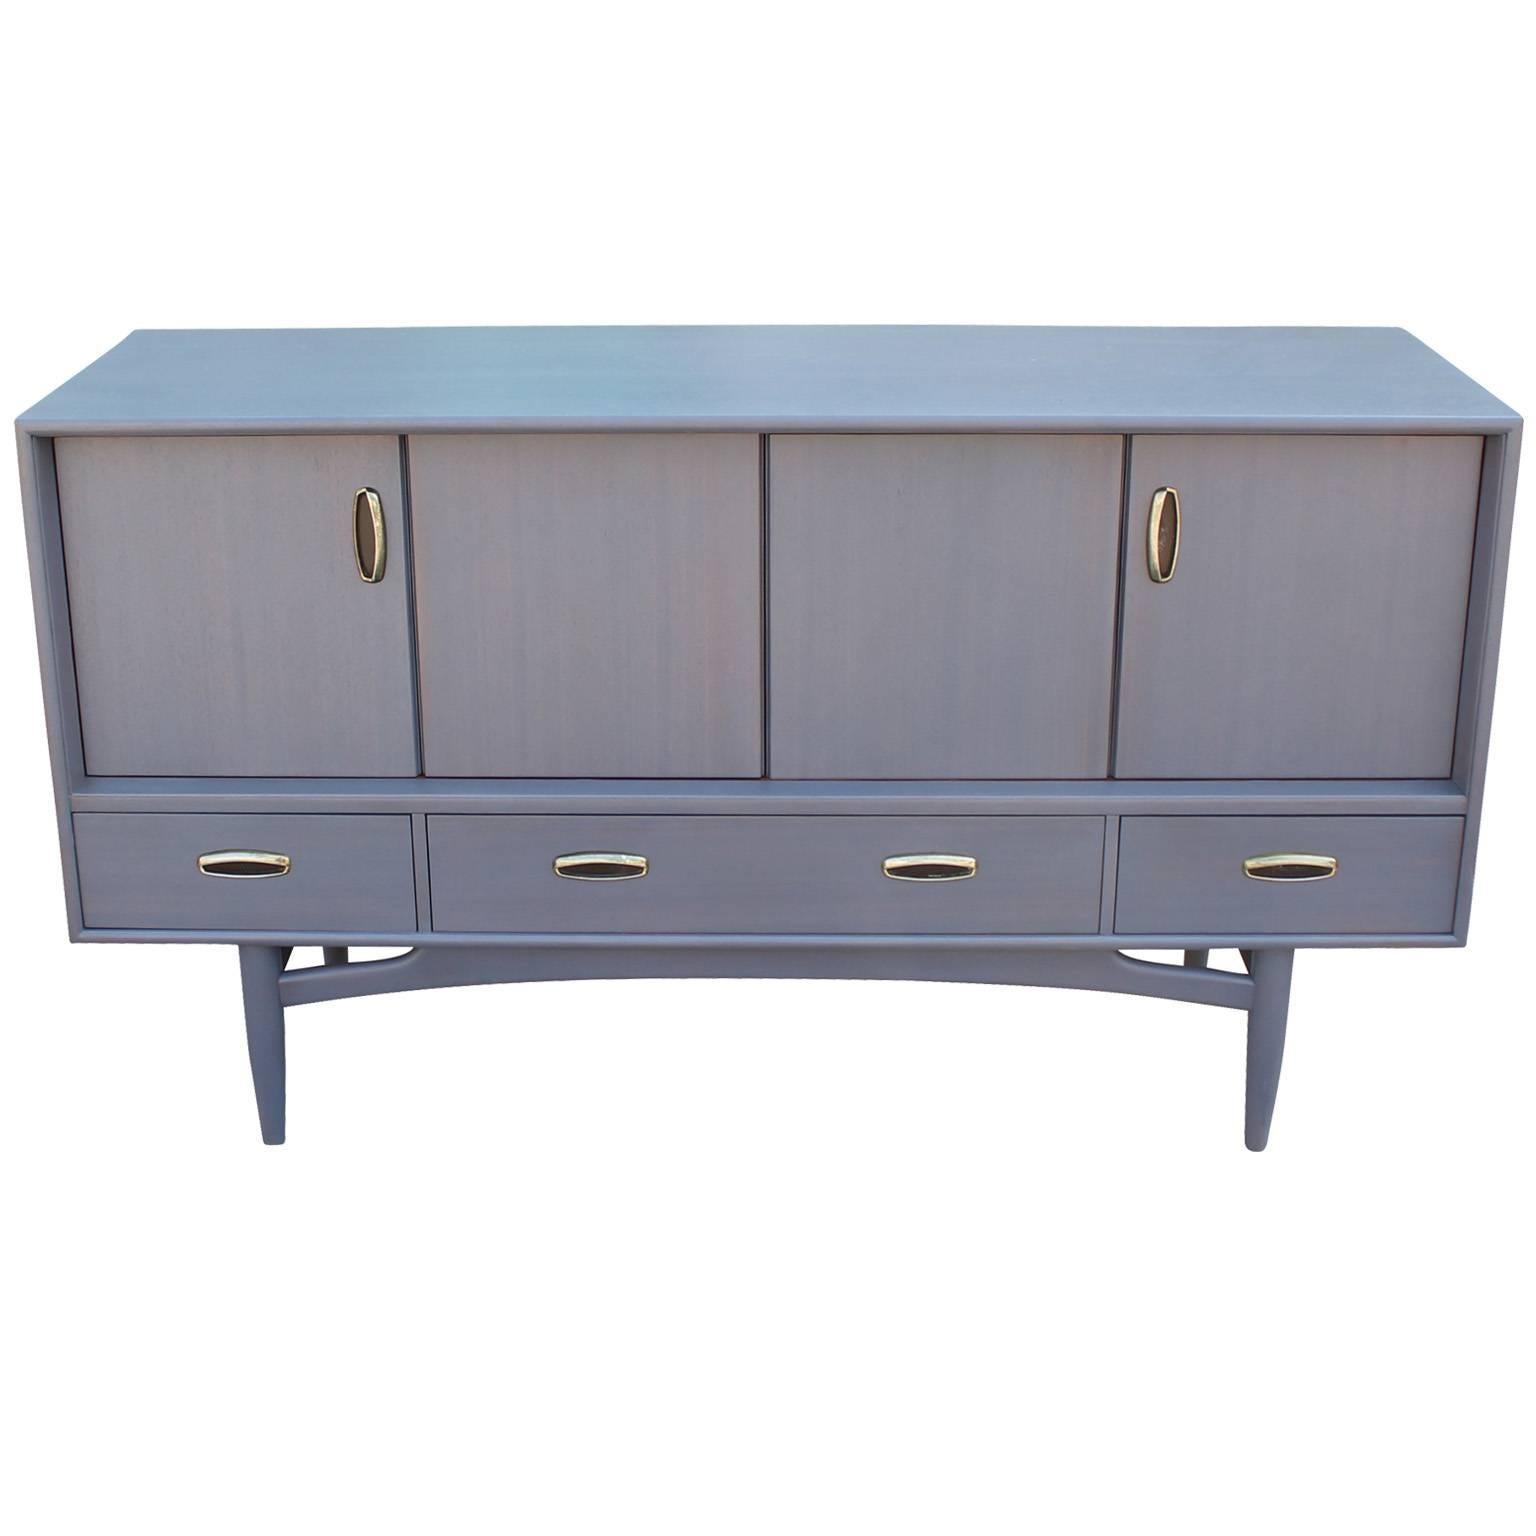 French grey-blue sideboard with aged brass handles. Sideboard or Credenza is made out of teak and is stained a beautiful pale French Blue Grey. Two folding door open to a single shelf. Three drawers provide additional storage.